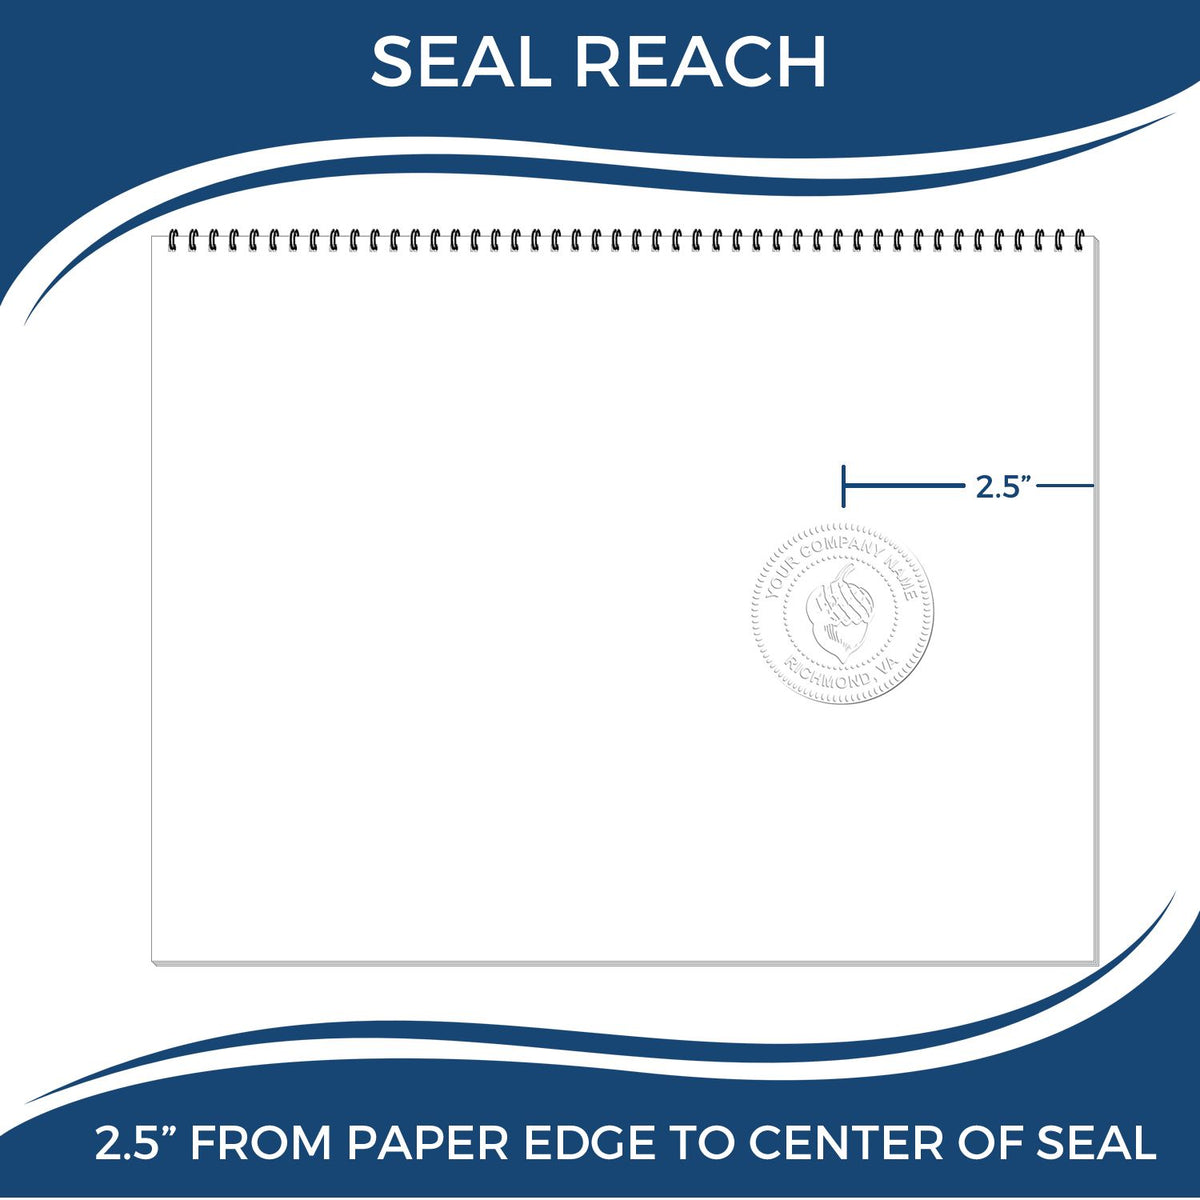 An infographic showing the seal reach which is represented by a ruler and a miniature seal image of the Heavy Duty Cast Iron Hawaii Engineer Seal Embosser